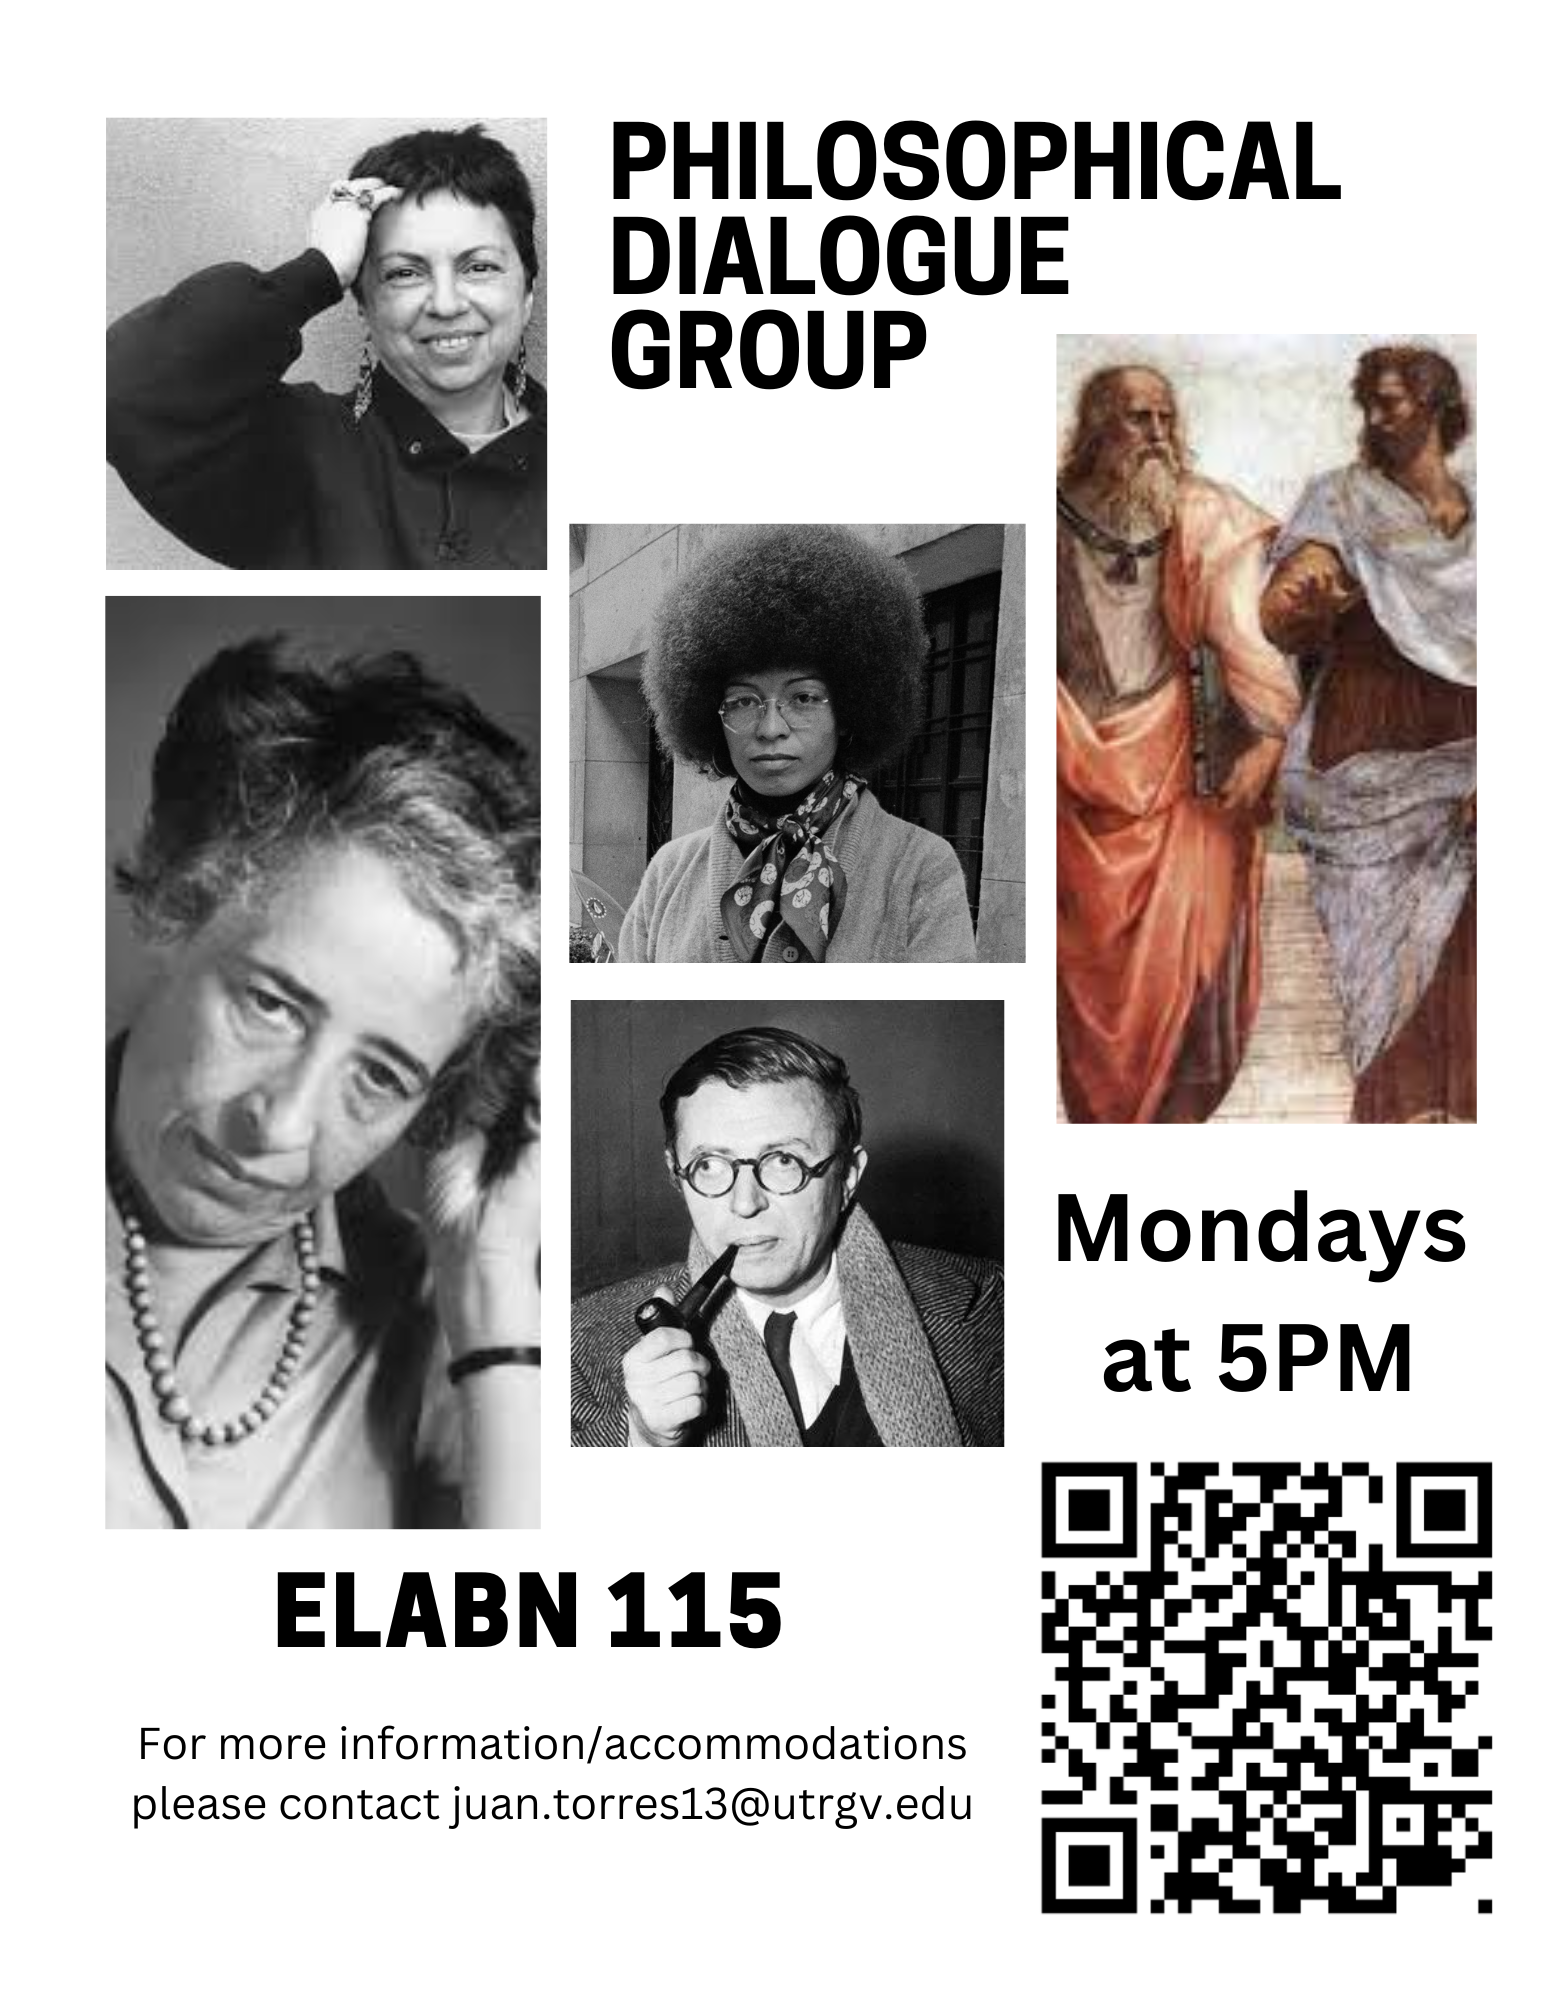 The Philosophical Dialogue Club is back for the fall semester!